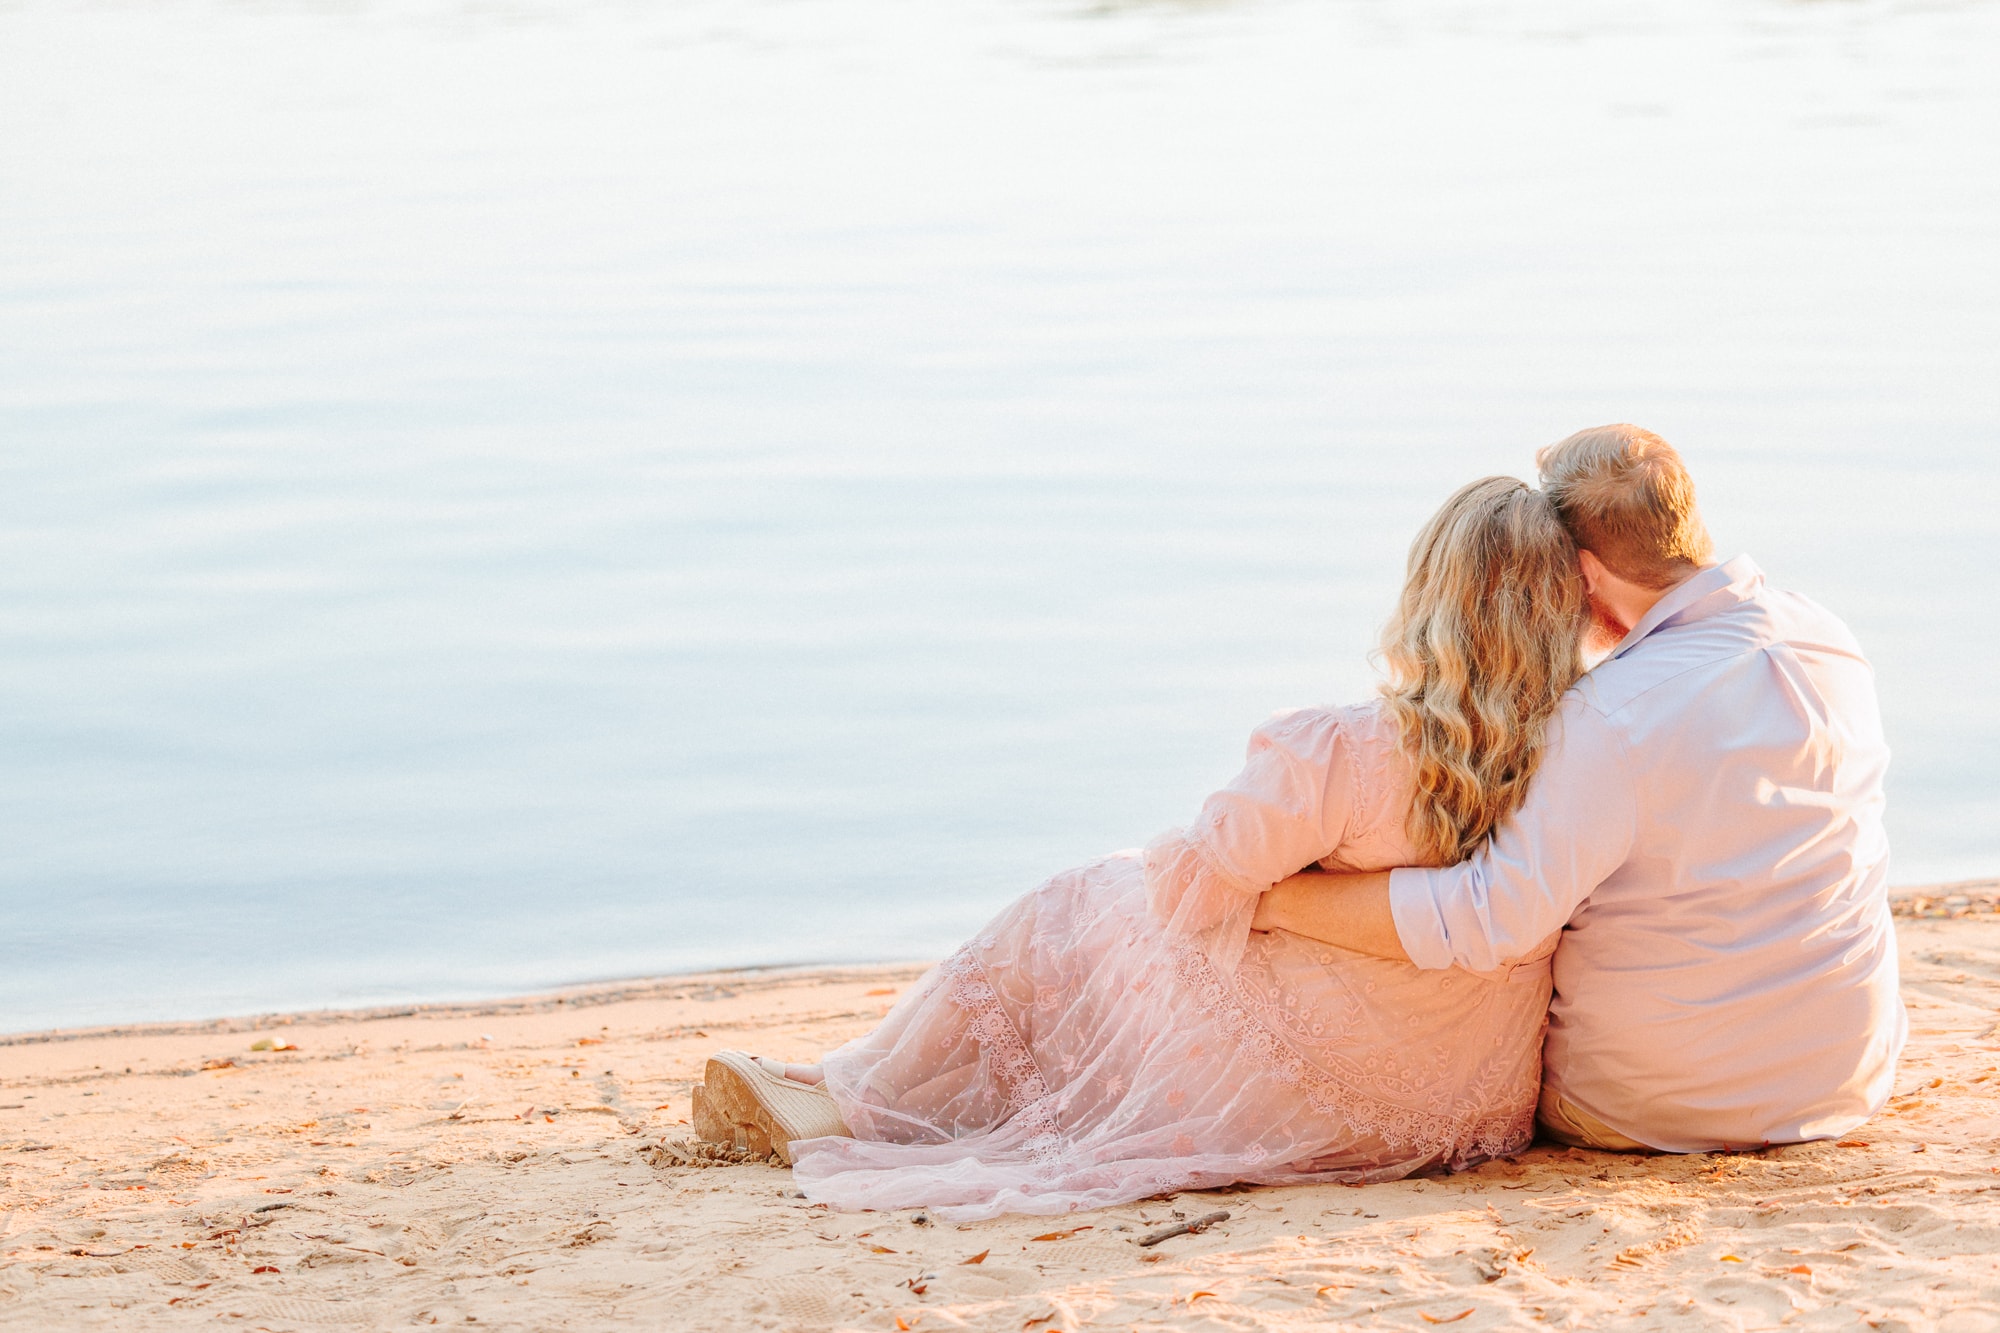 During their Huntersville engagement session, the couple sits on the sandy shores of the lake and looks out at the water.